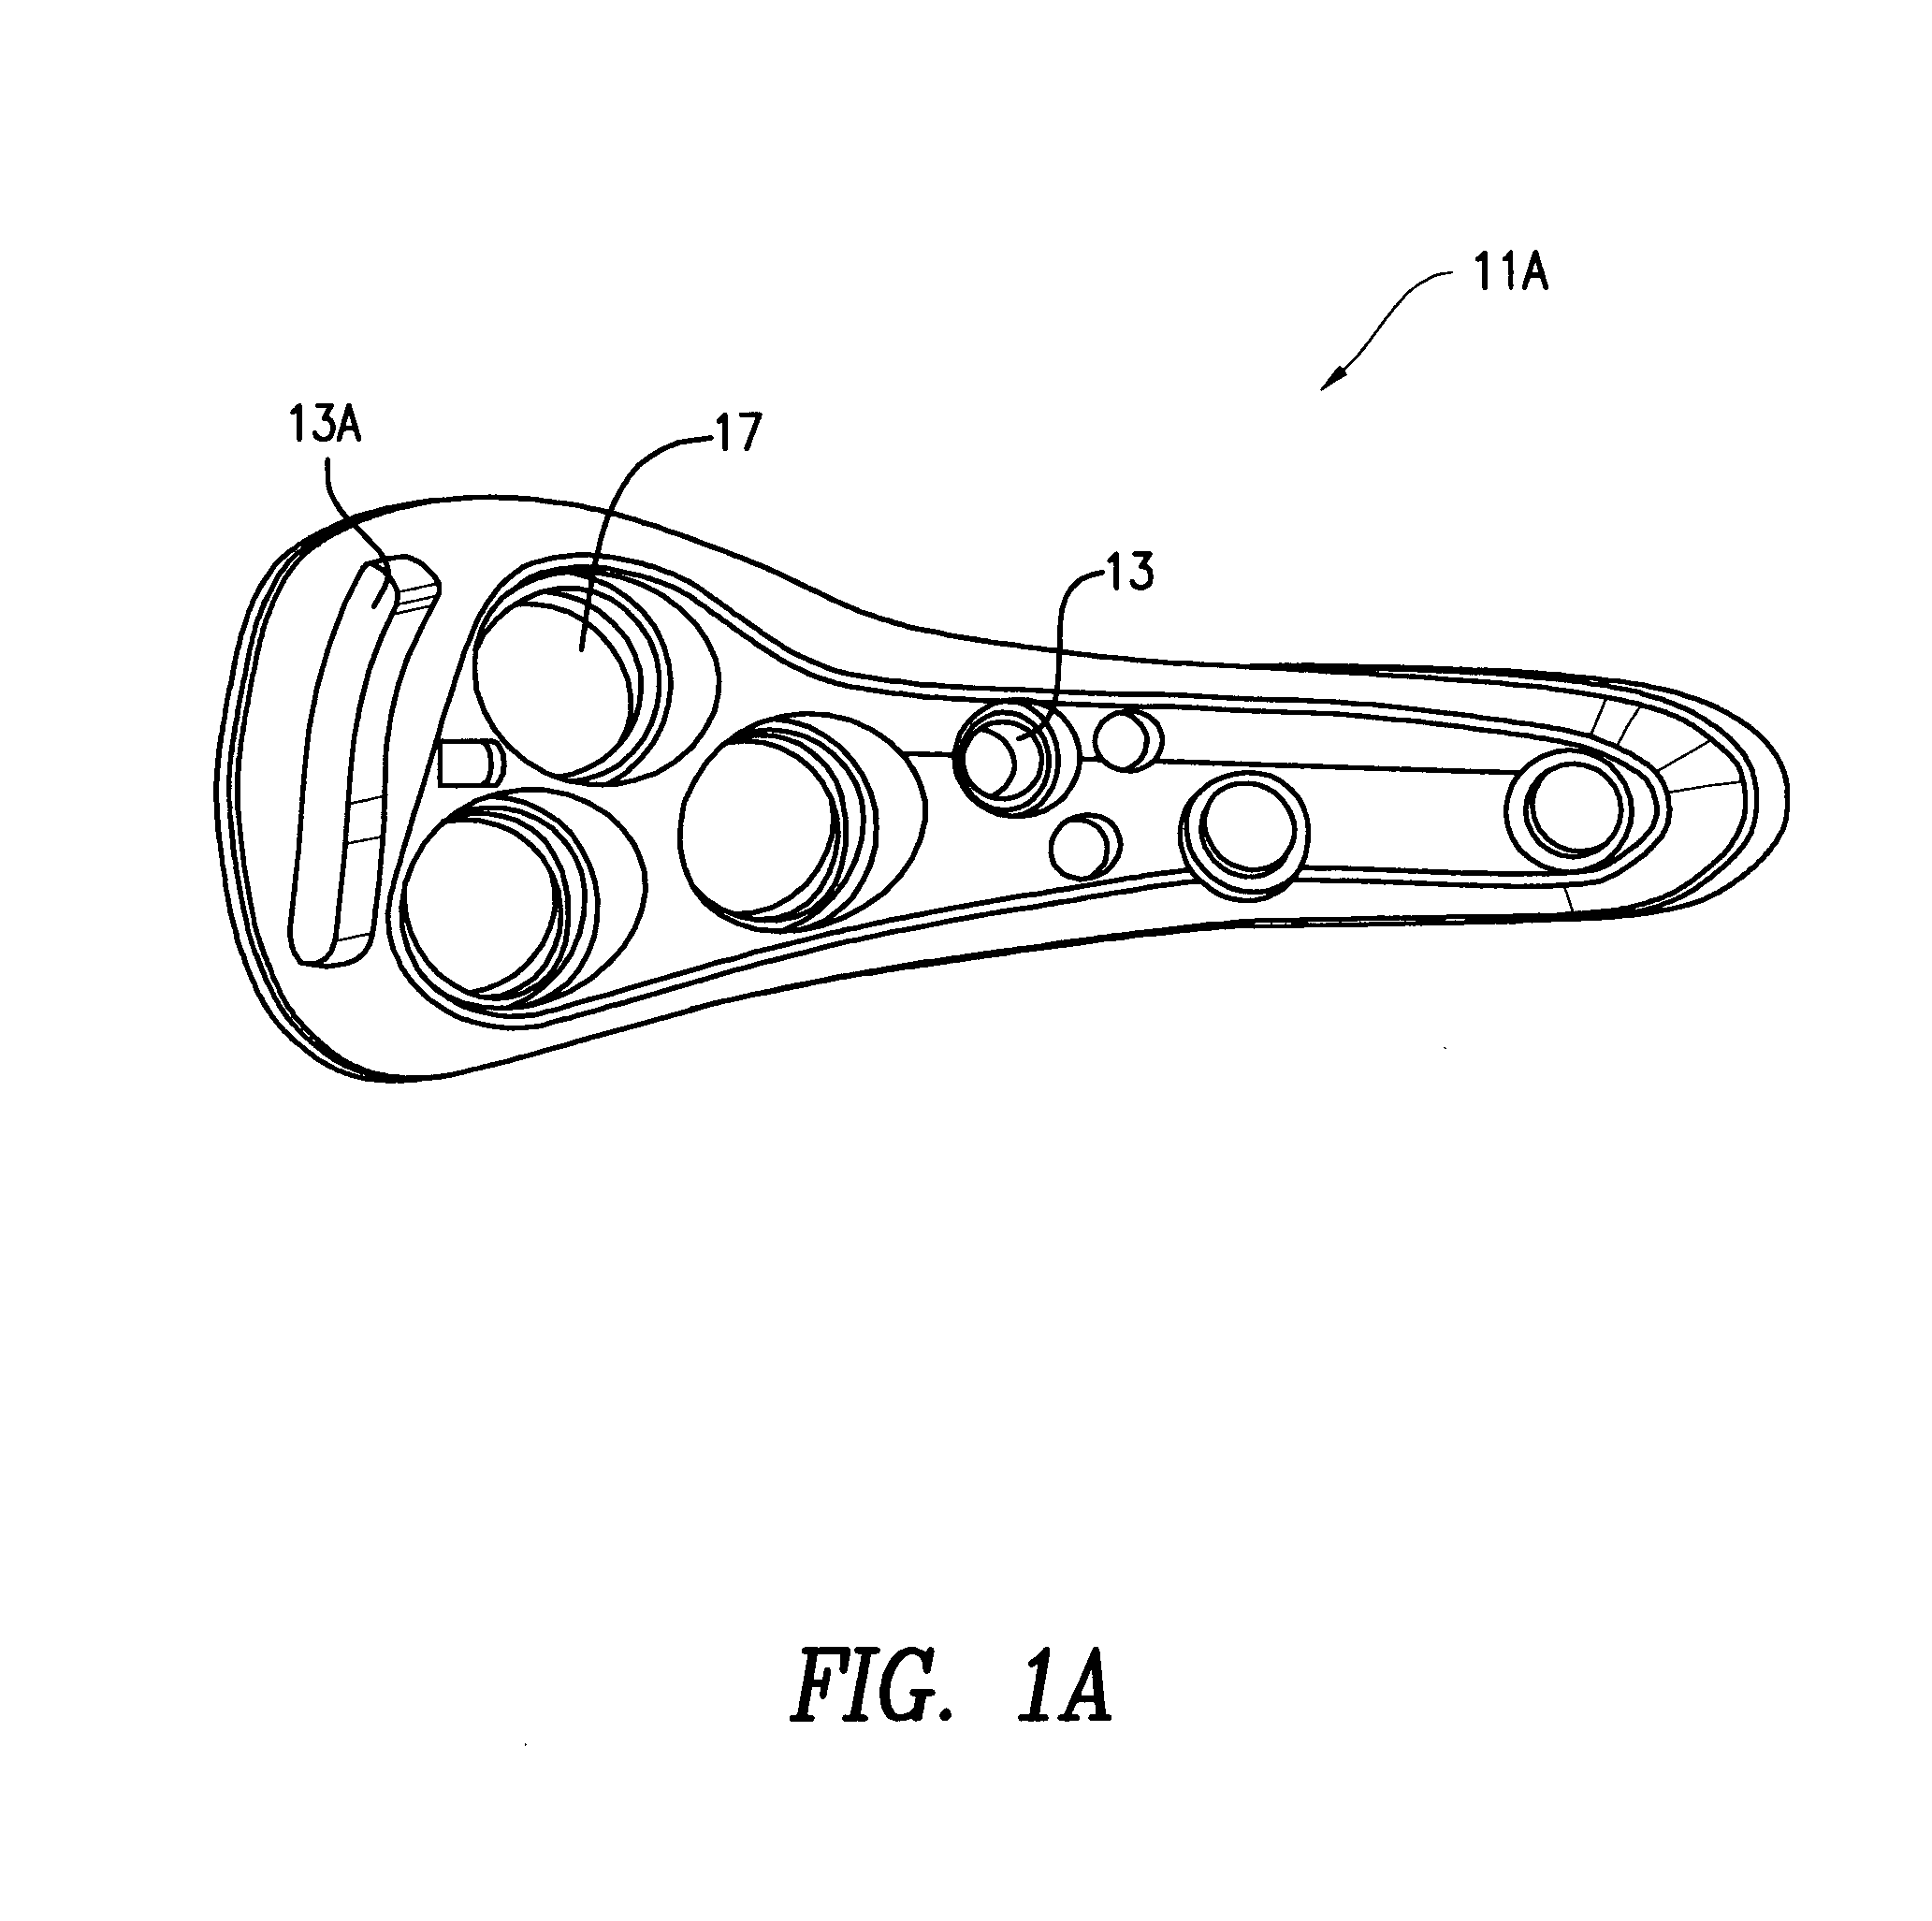 Hip fracture device with barrel and end cap for load control